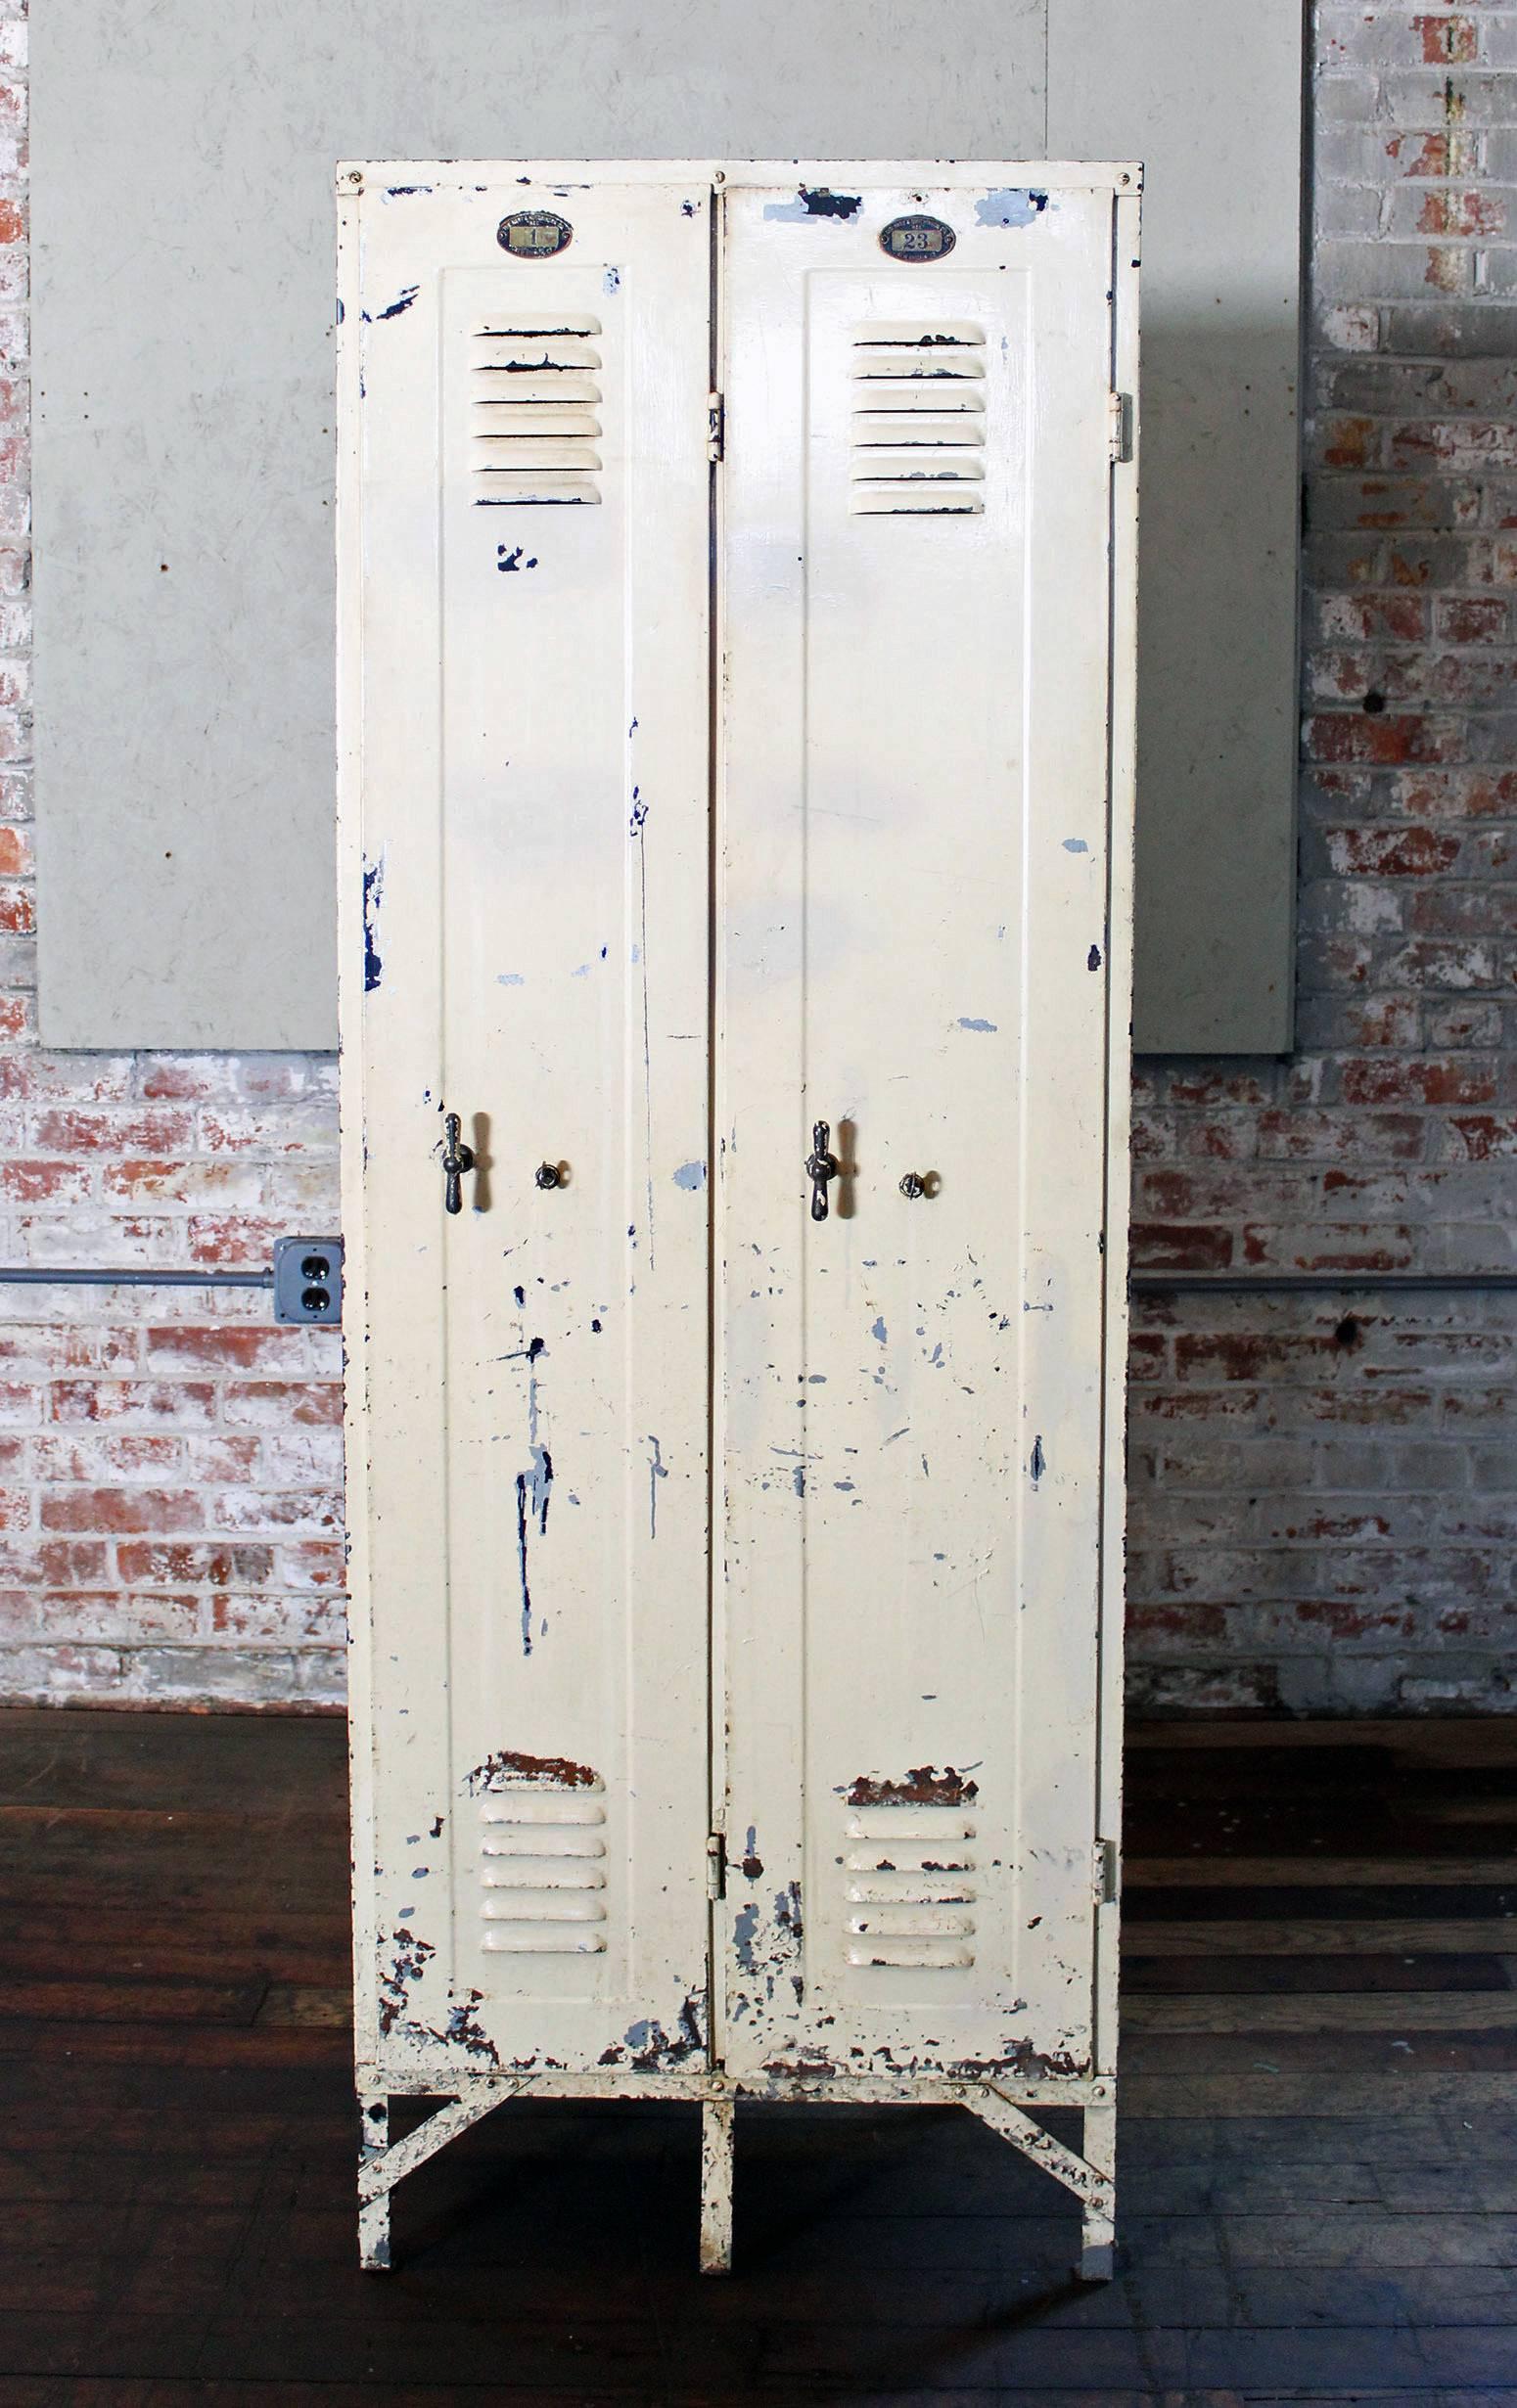 Set of vintage Industrial steel or metal lockers with brass knobs and number plates. Measures: 24 1/4" in width, 66 1/4" in height, 15 3/4" in depth, 17" in depth overall including knobs. Usable space inside locker is approx